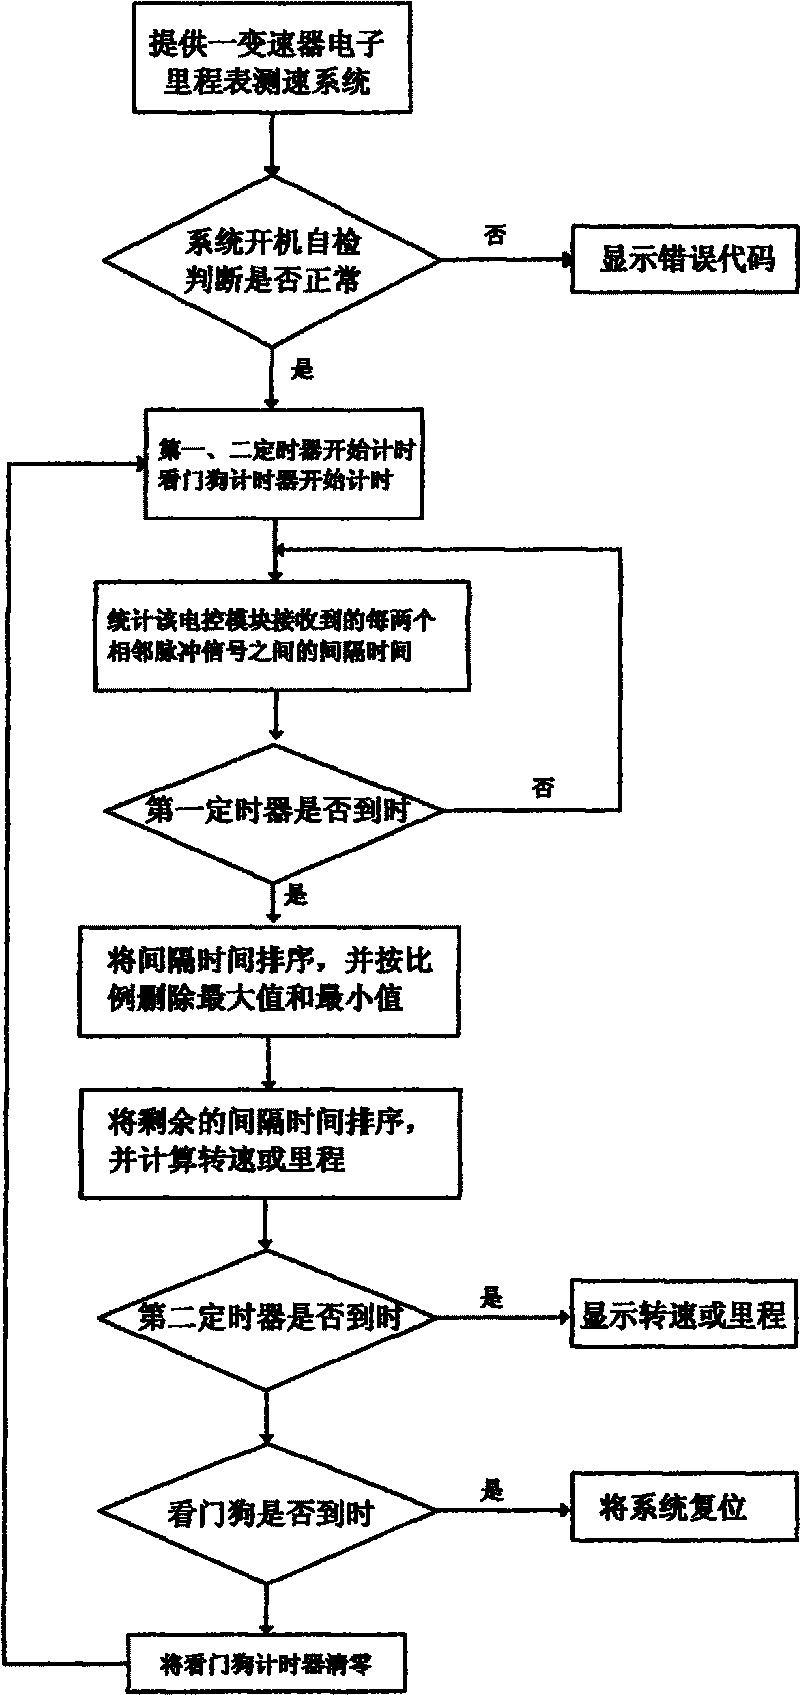 Transmission electronic odometer speed-measuring system and method